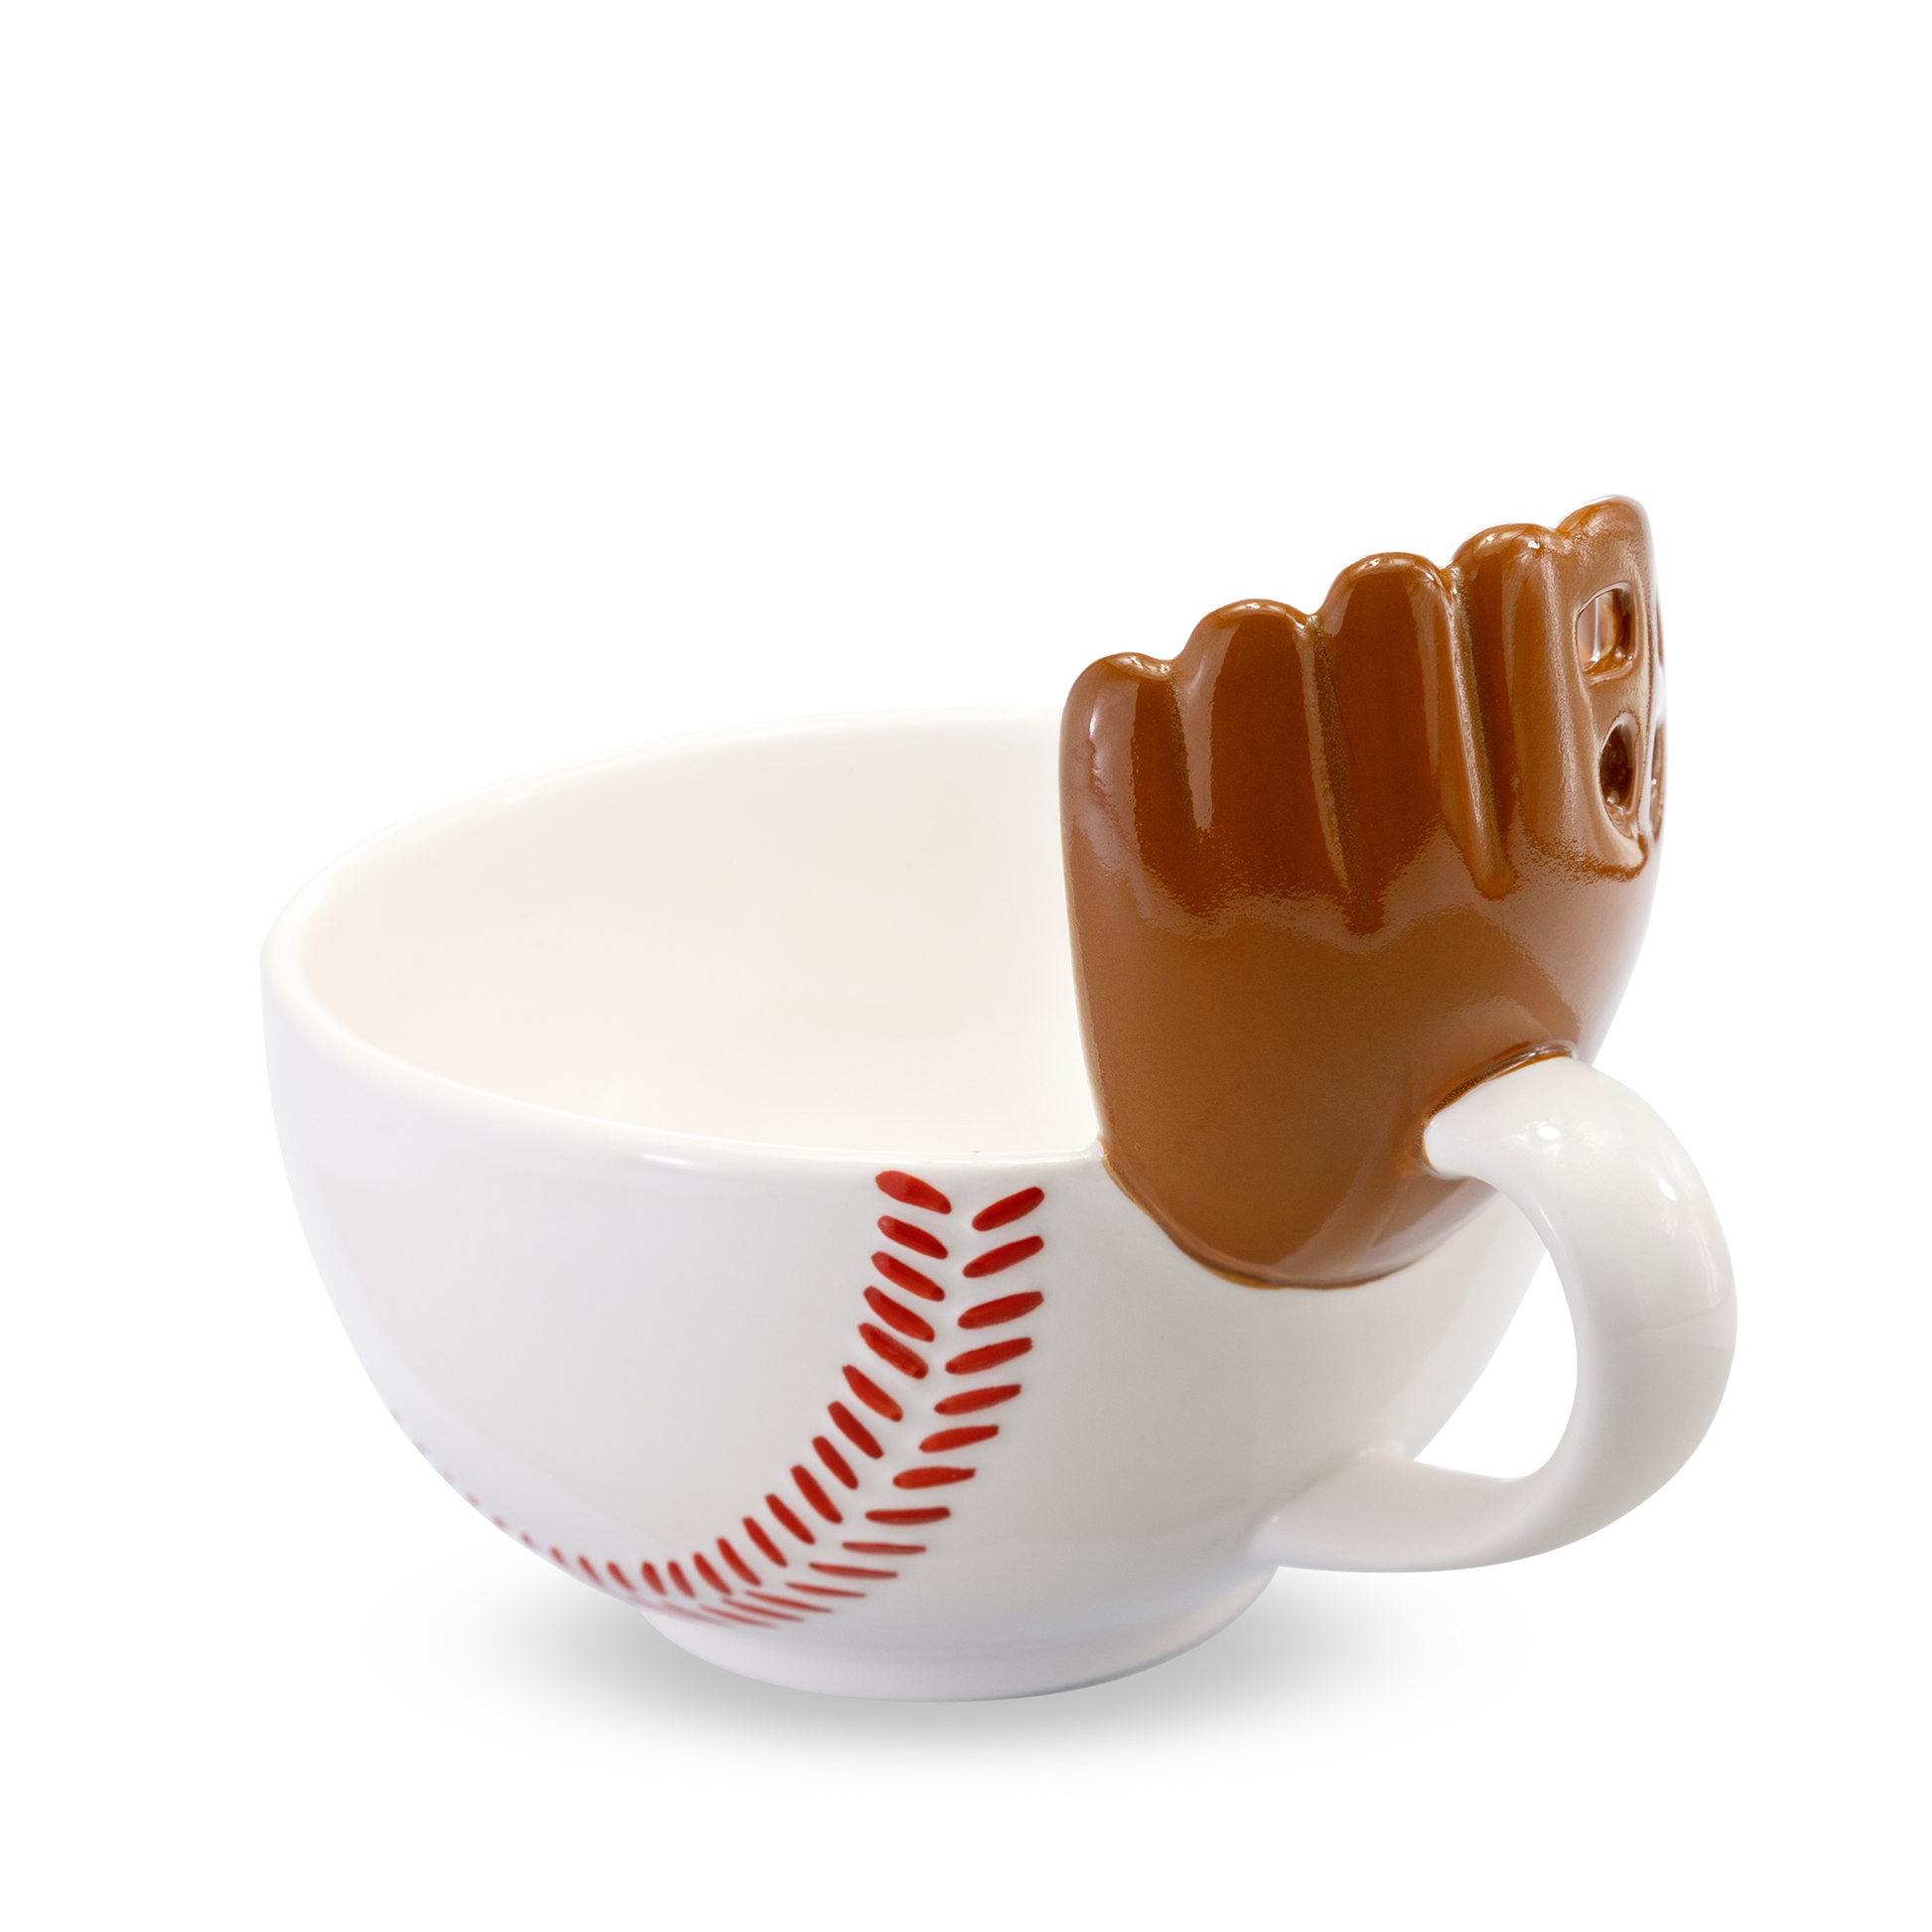 The Baseball Mug with a Glove! START YOUR MORNINGS WITH FUN! Play with your food with this original baseball mug with an attached glove. Perfect for scoring mini marshmallows into cocoa, cereal into milk, crackers into soup, or toppings onto ice cream! Something to root for in your morning routine!